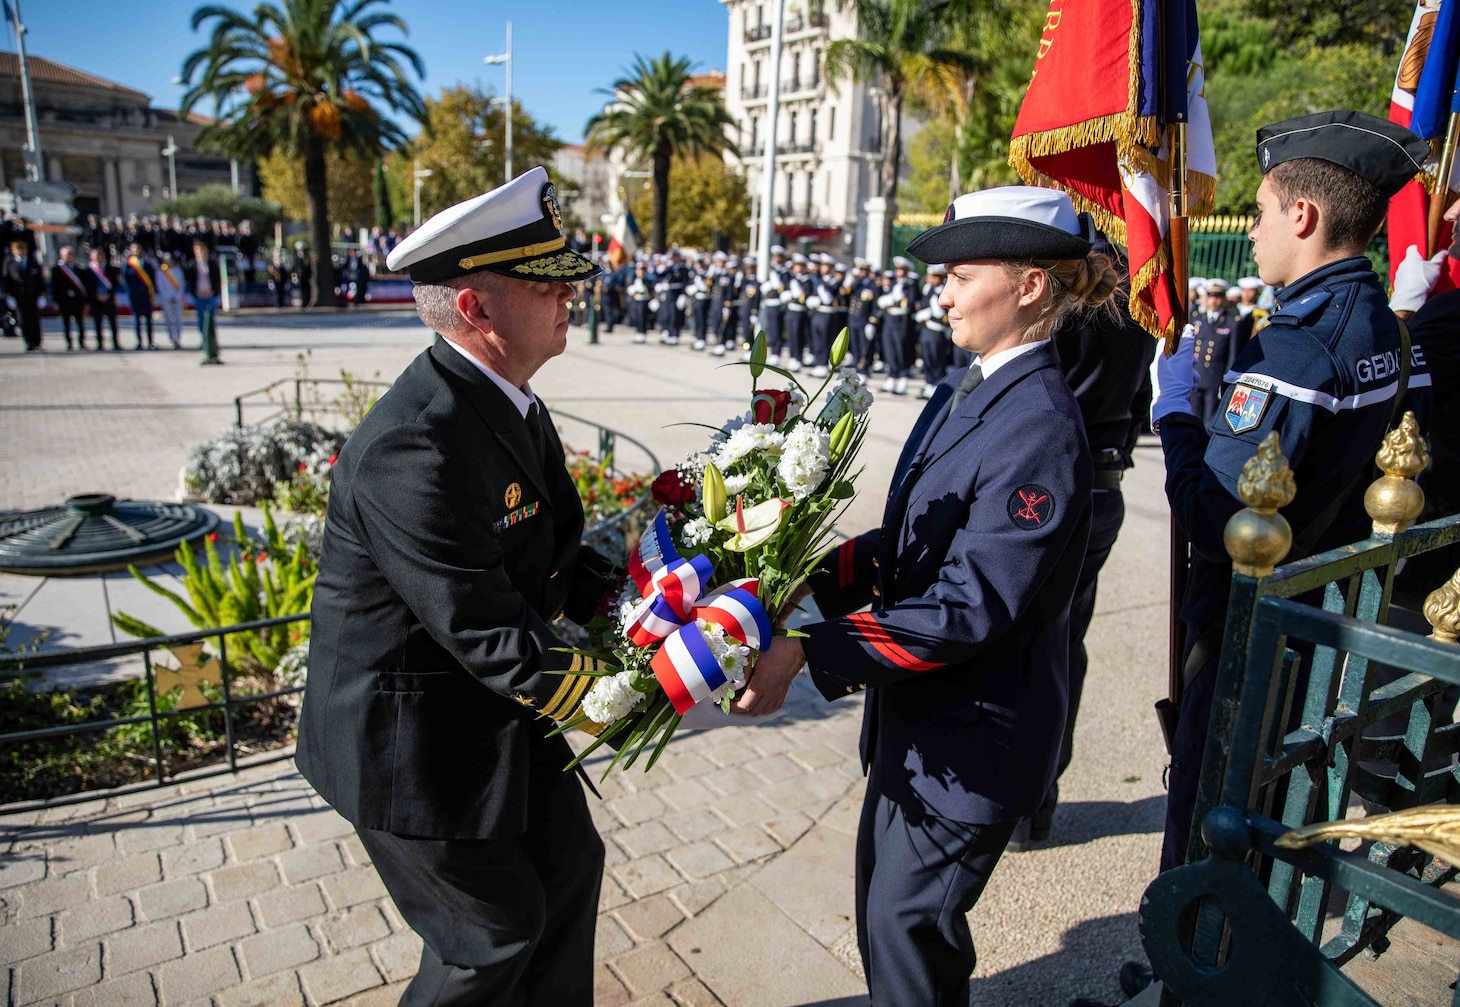 TOULON, France (Nov. 11, 2022) Vice Adm. Thomas Ishee, commander, U.S. Sixth Fleet, accepts a wreath from a member of the French navy to lay in front of a memorial, during a wreath laying ceremony in commemoration of Armistice Day at the war memorial in Toulon, France, Nov. 11, 2022. Roosevelt is on a scheduled deployment in the U.S. Naval Forces Europe area of operations, employed by U.S. Sixth Fleet to defend U.S., allied and partner interests. (U.S. Navy photo by Mass Communication Specialist 2nd Class Danielle Baker/Released)